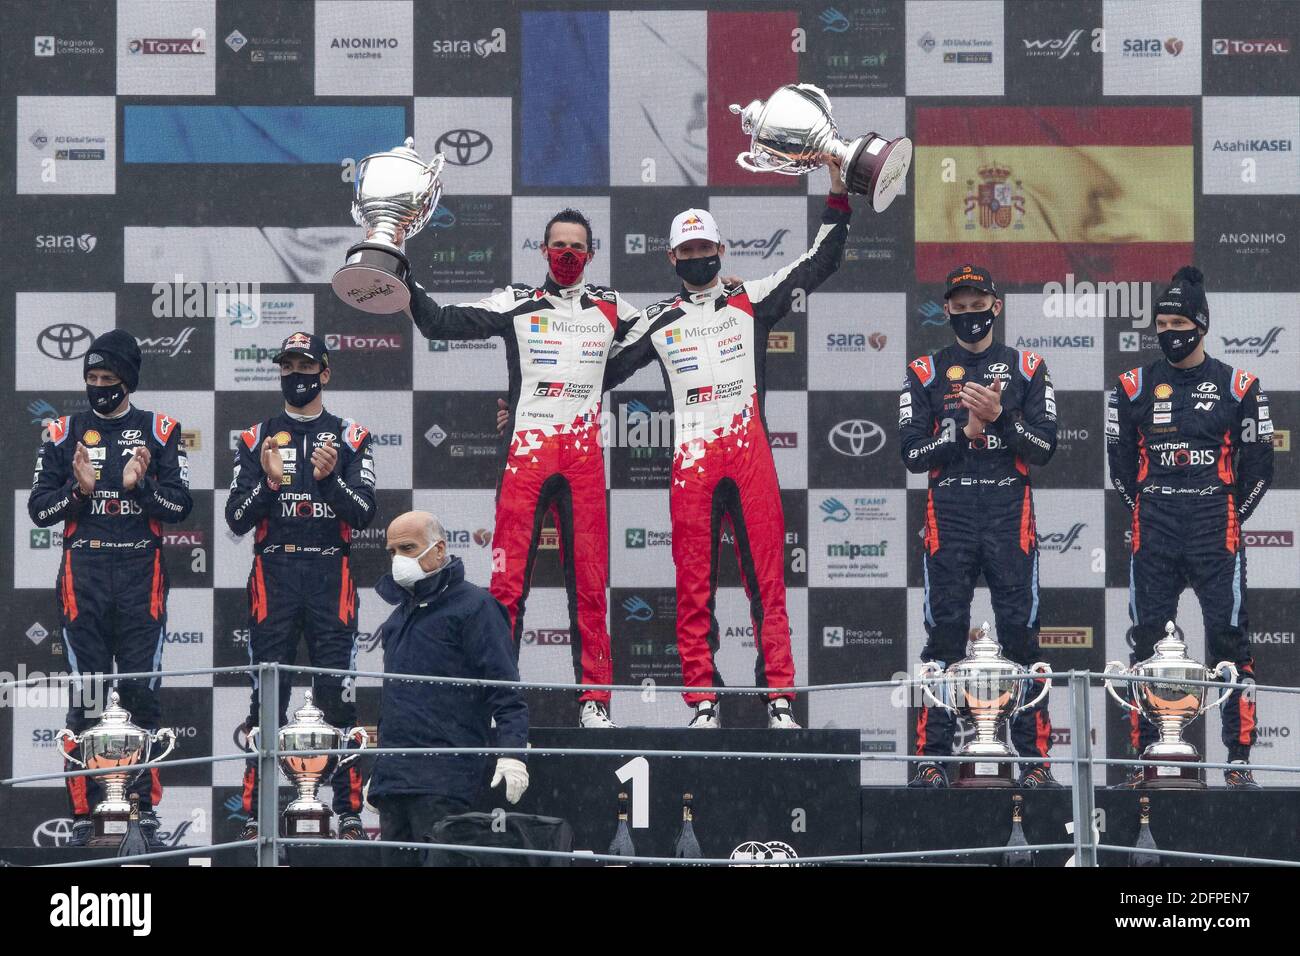 Monza, Italy. 06th Dec, 2020. OGIER Sebastien (FRA), Toyota Yaris WRC, Toyota Gazoo Racing WRT, INGRASSIA Julien (FRA), Toyota Yaris WRC, Toyota Gazoo Racing WRT, Dani SORDO (ESP), Carlos DEL BARRIO (ESP), Hyundai i20 Coupe WRC, Hyundai Shell Mobis WRT,portrait,TANAK Ott (EST), JARVEOJA Martin (EST), Hyundai i20 Coupe WRC, Hyundai Shell Mobis WRT, portrait, podium, 2020 world champions, during the 2020 ACI Rally Monza, 7th round of the 2020 FIA WRC Championship from December 3 to 8, 2020 at Monza, Brianza in Italy - Photo GrÃ©gory Lenormand / DPPI / LM Credit: Paola Benini/Alamy Live News Stock Photo